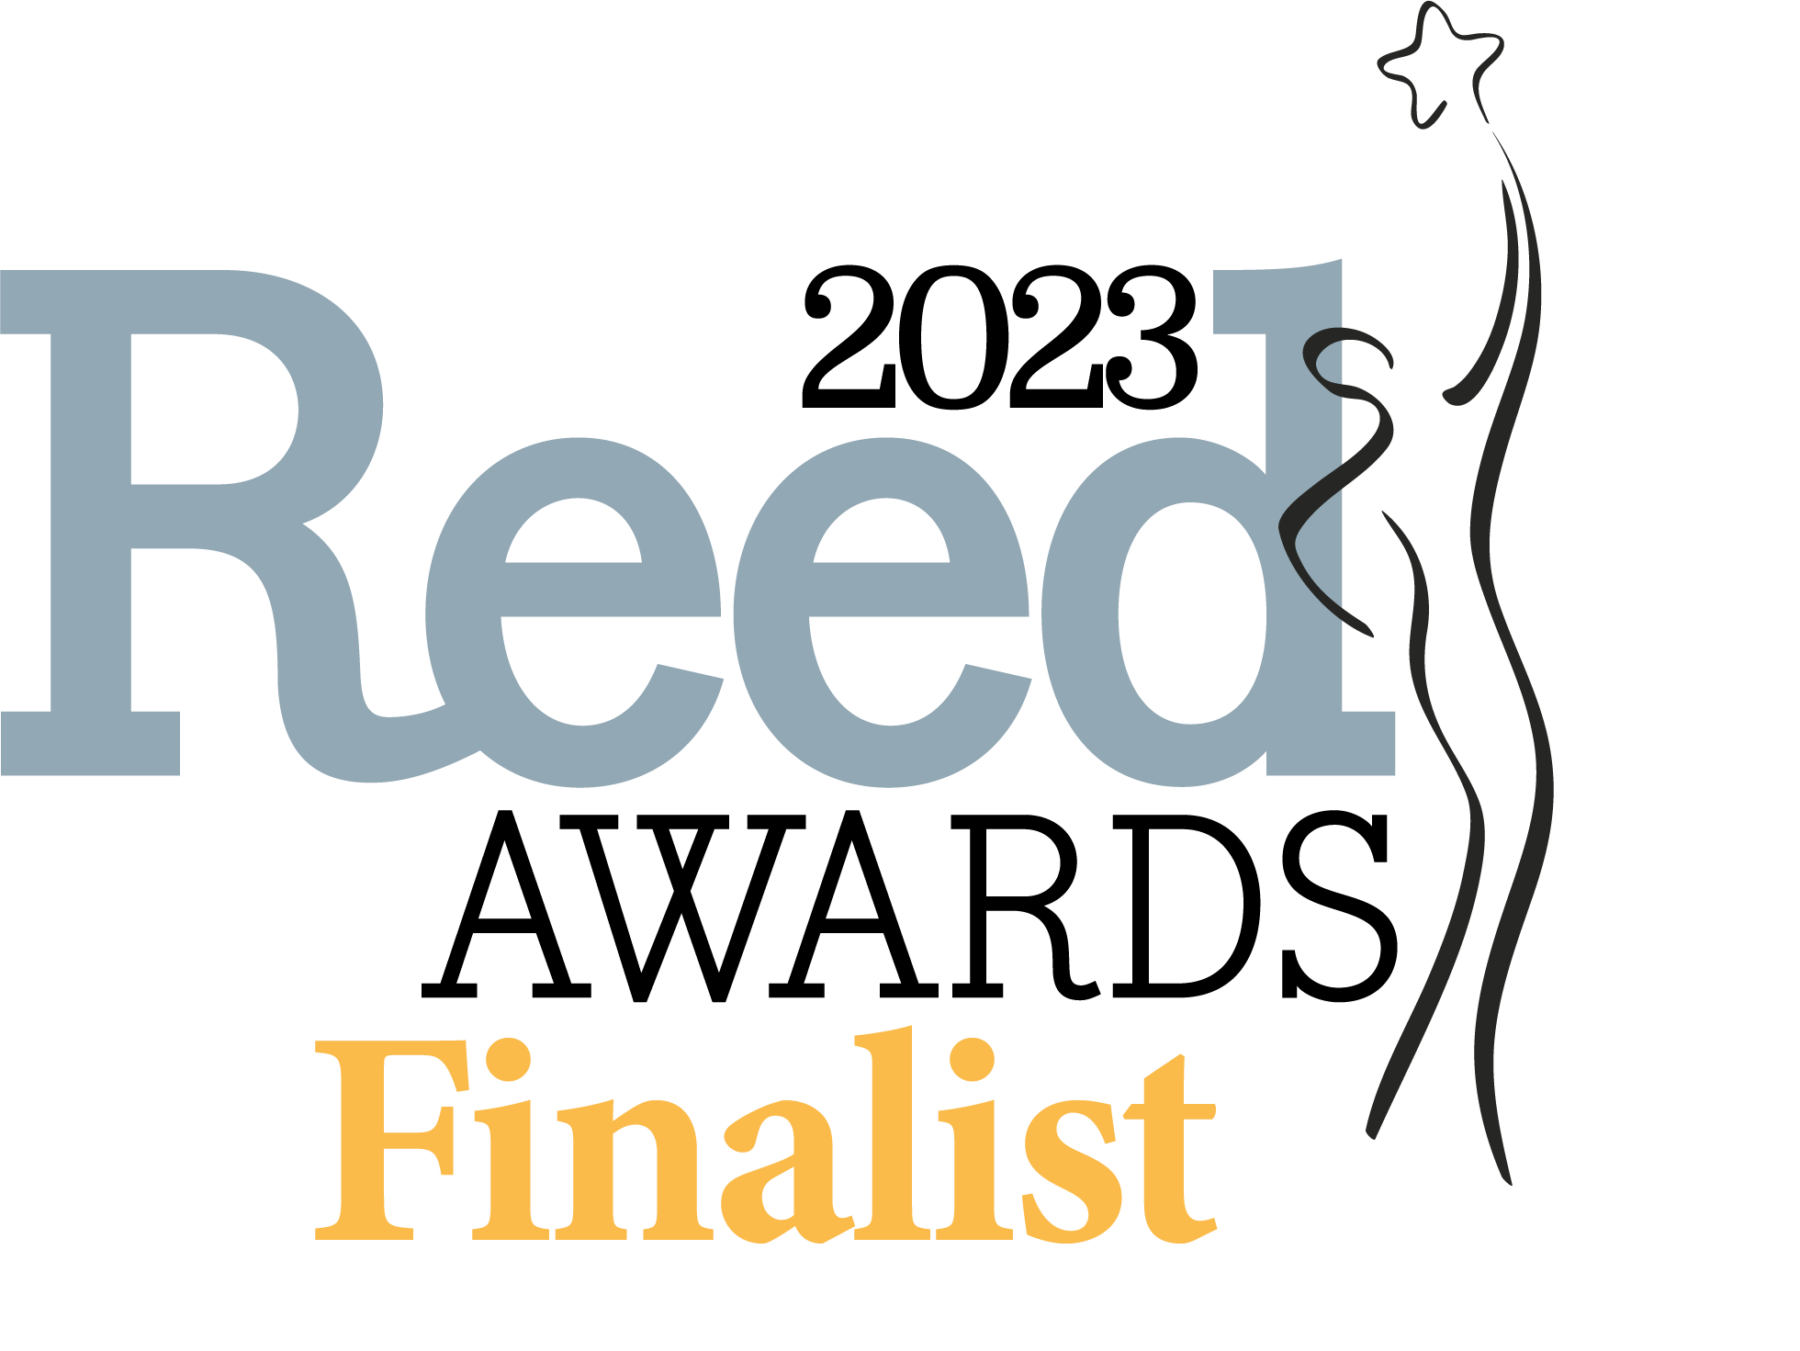 ContactDrive is a Reed Awards Finalist!